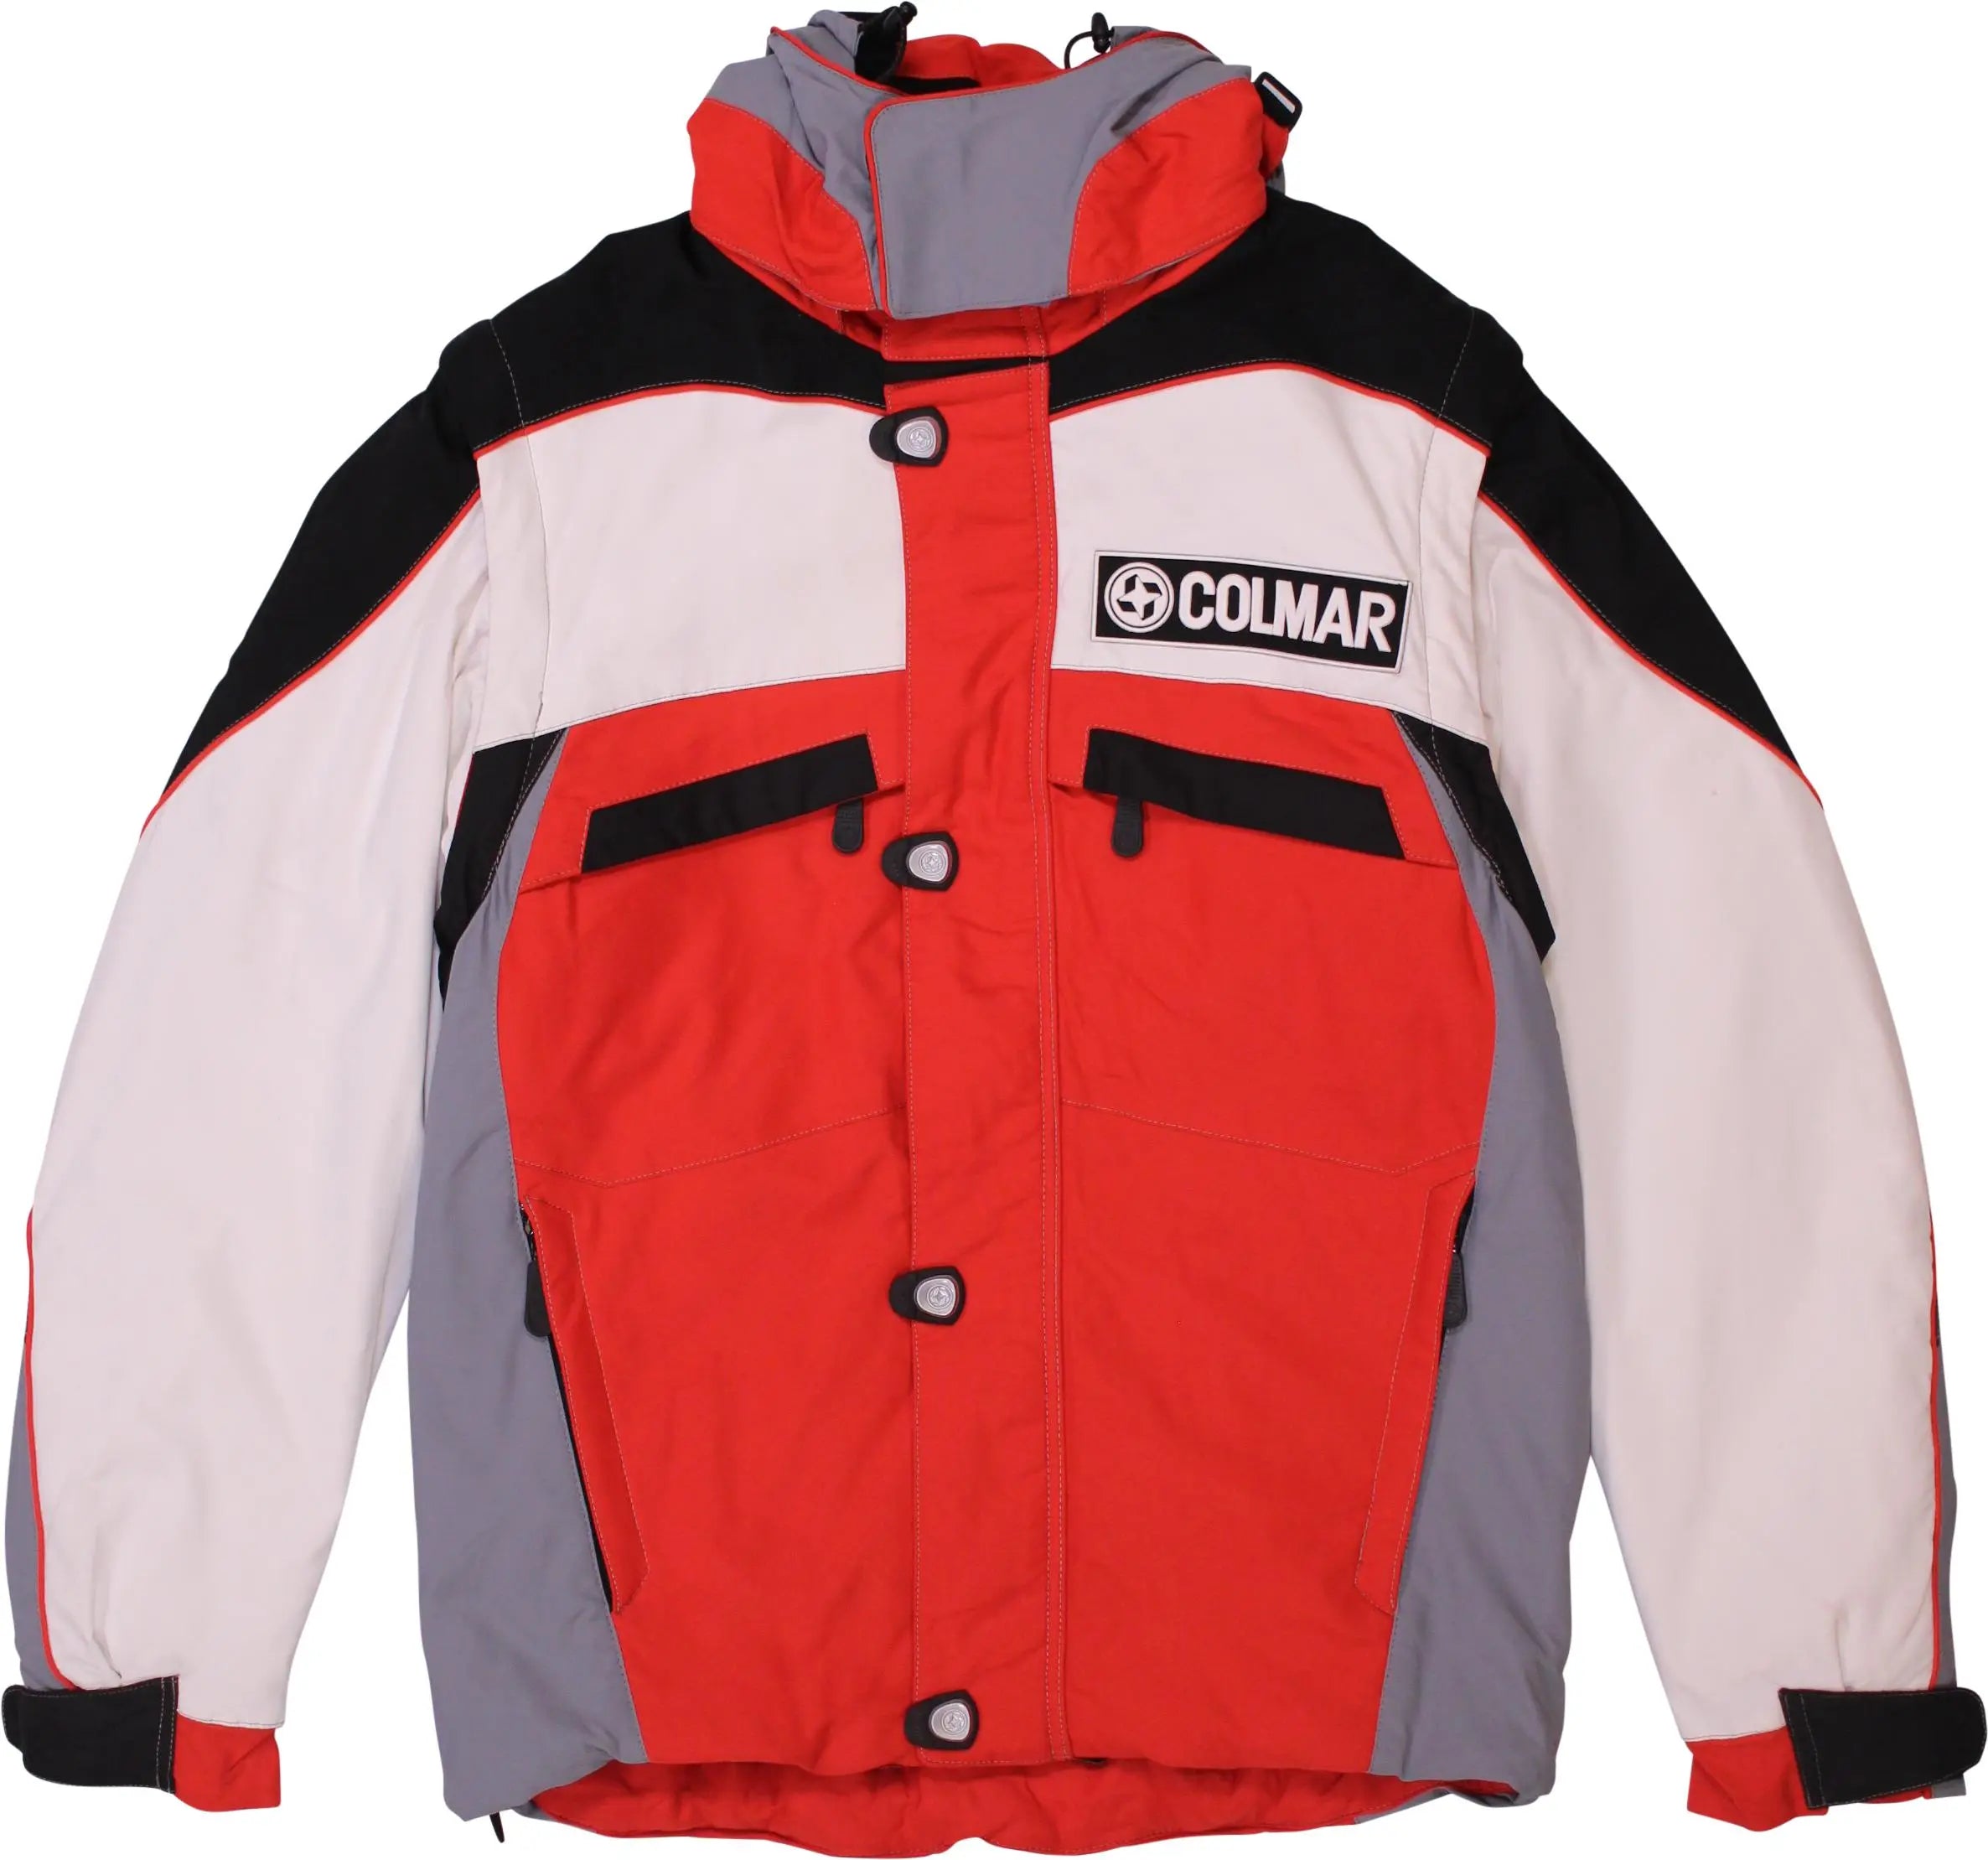 Colmar - Ski Coat with Zip-off Sleeves by Colmar- ThriftTale.com - Vintage and second handclothing